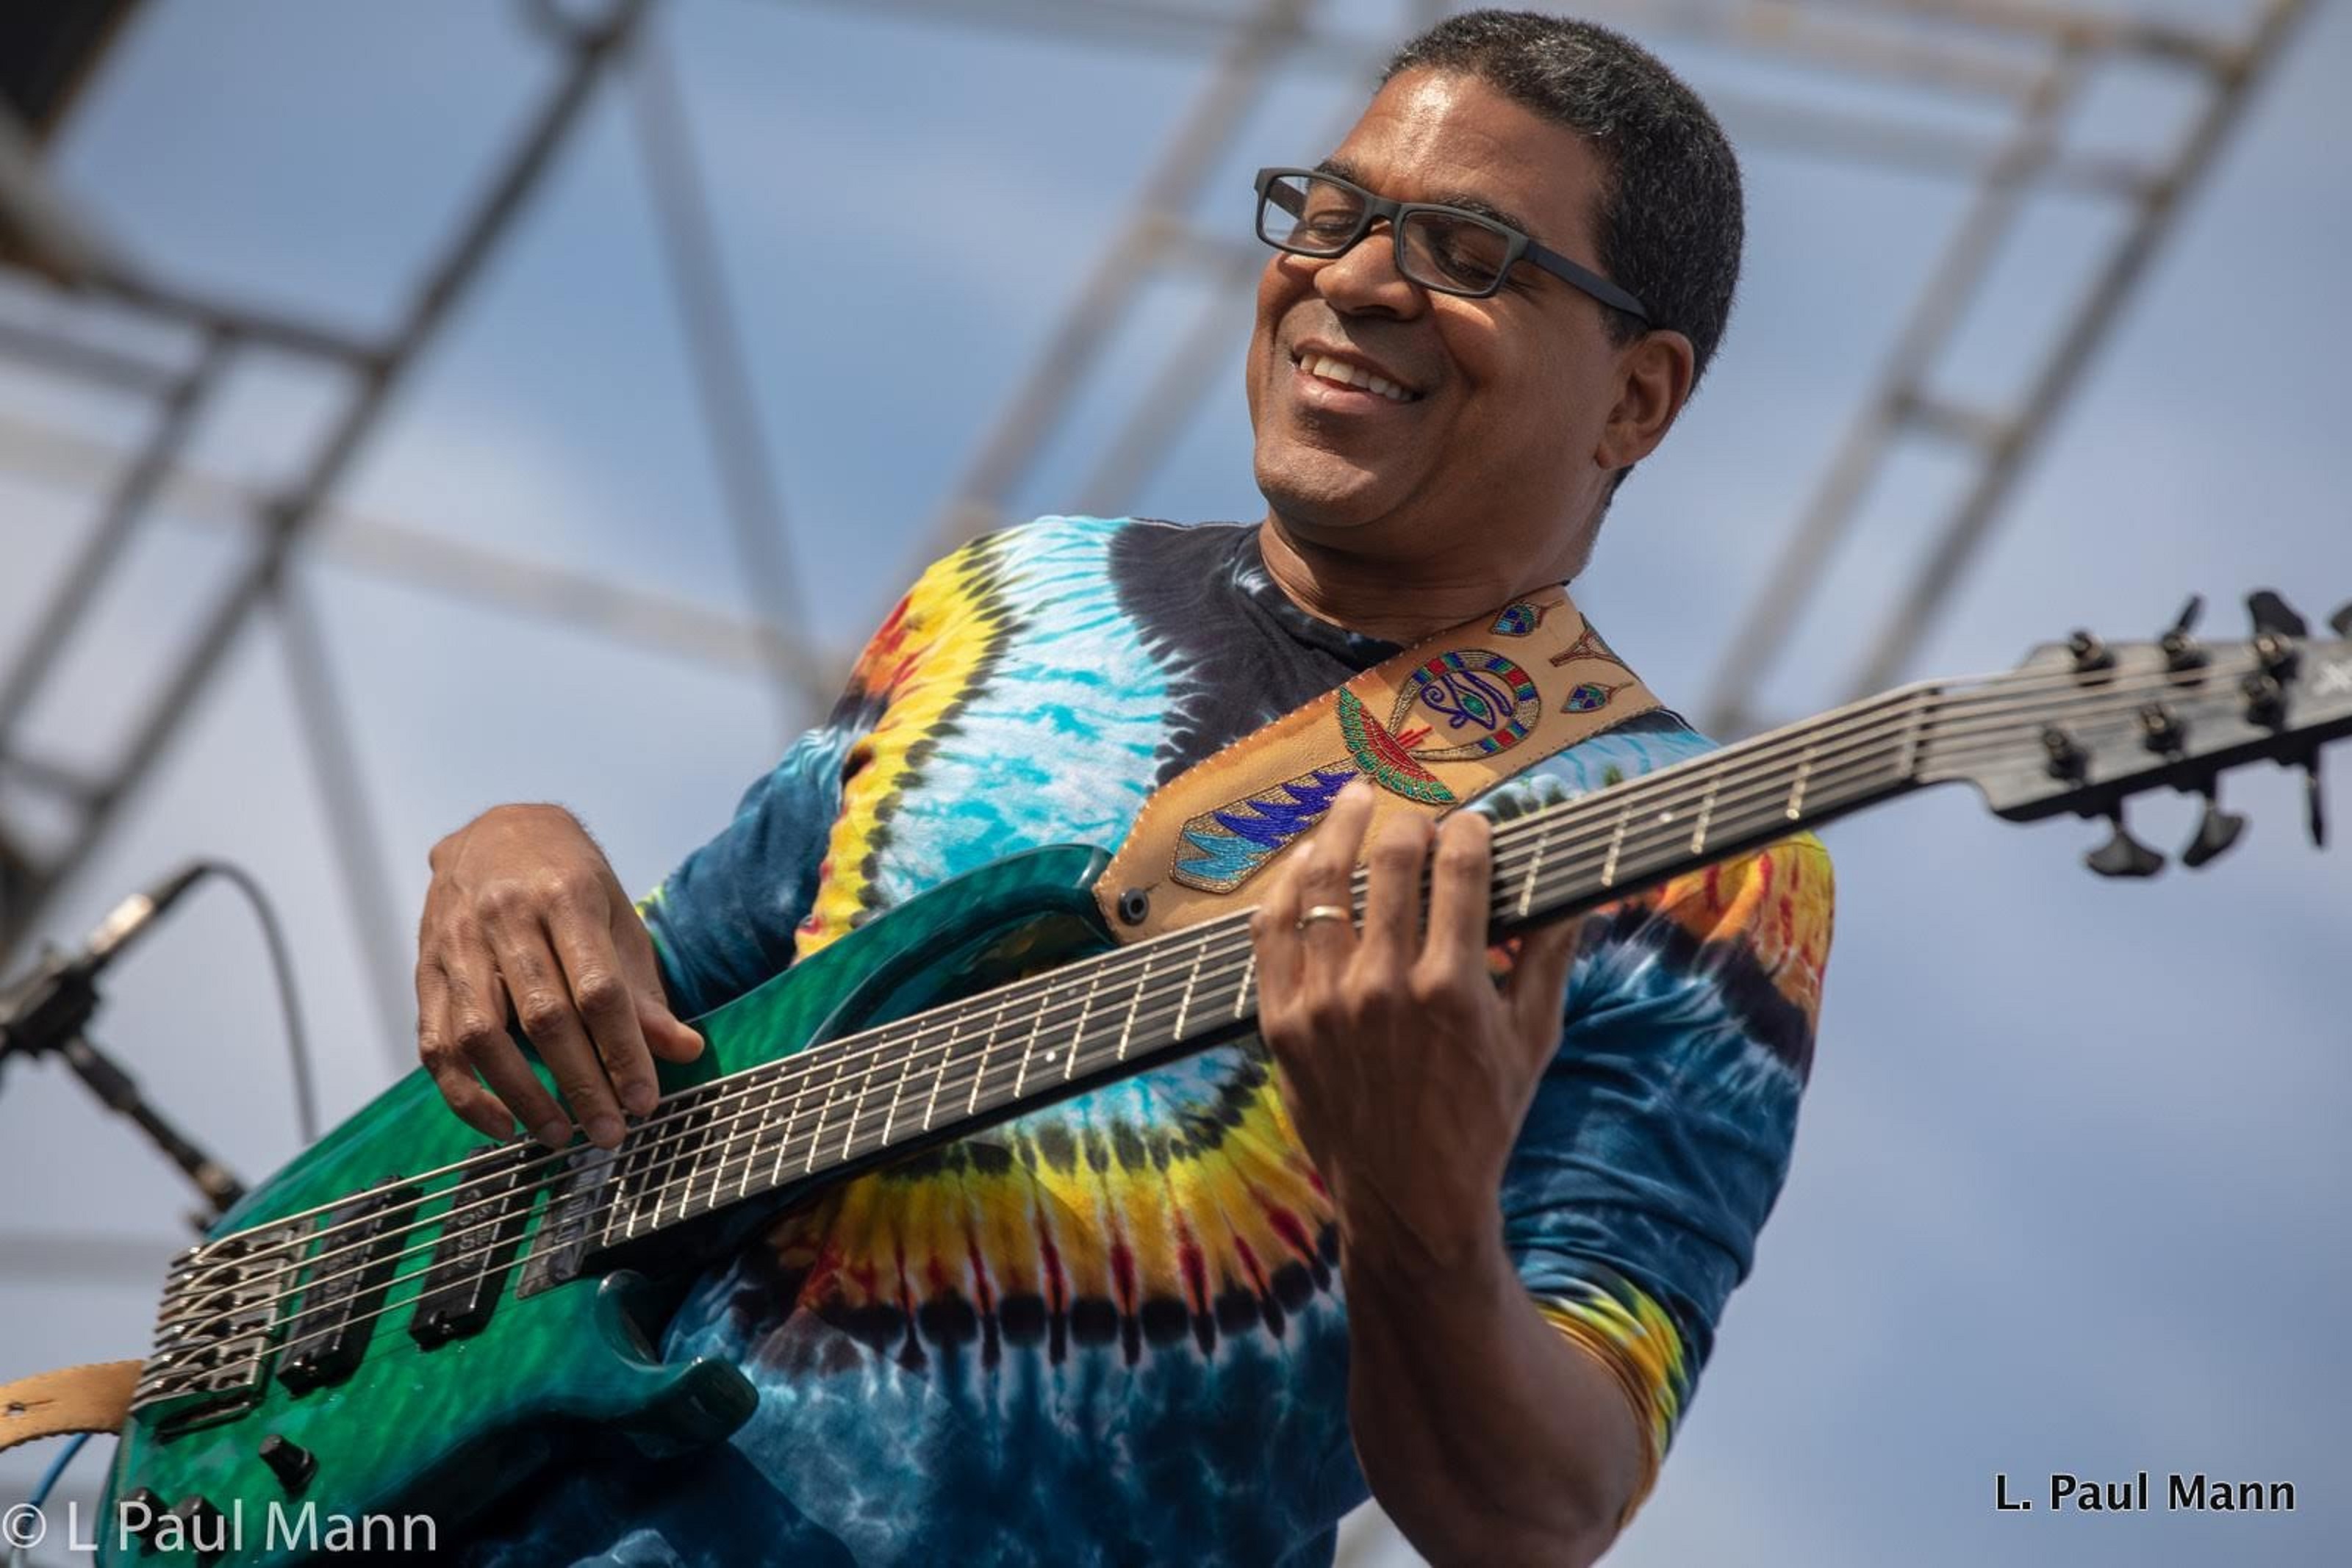 Oteil will have some very special guests @ Lockn' 2019